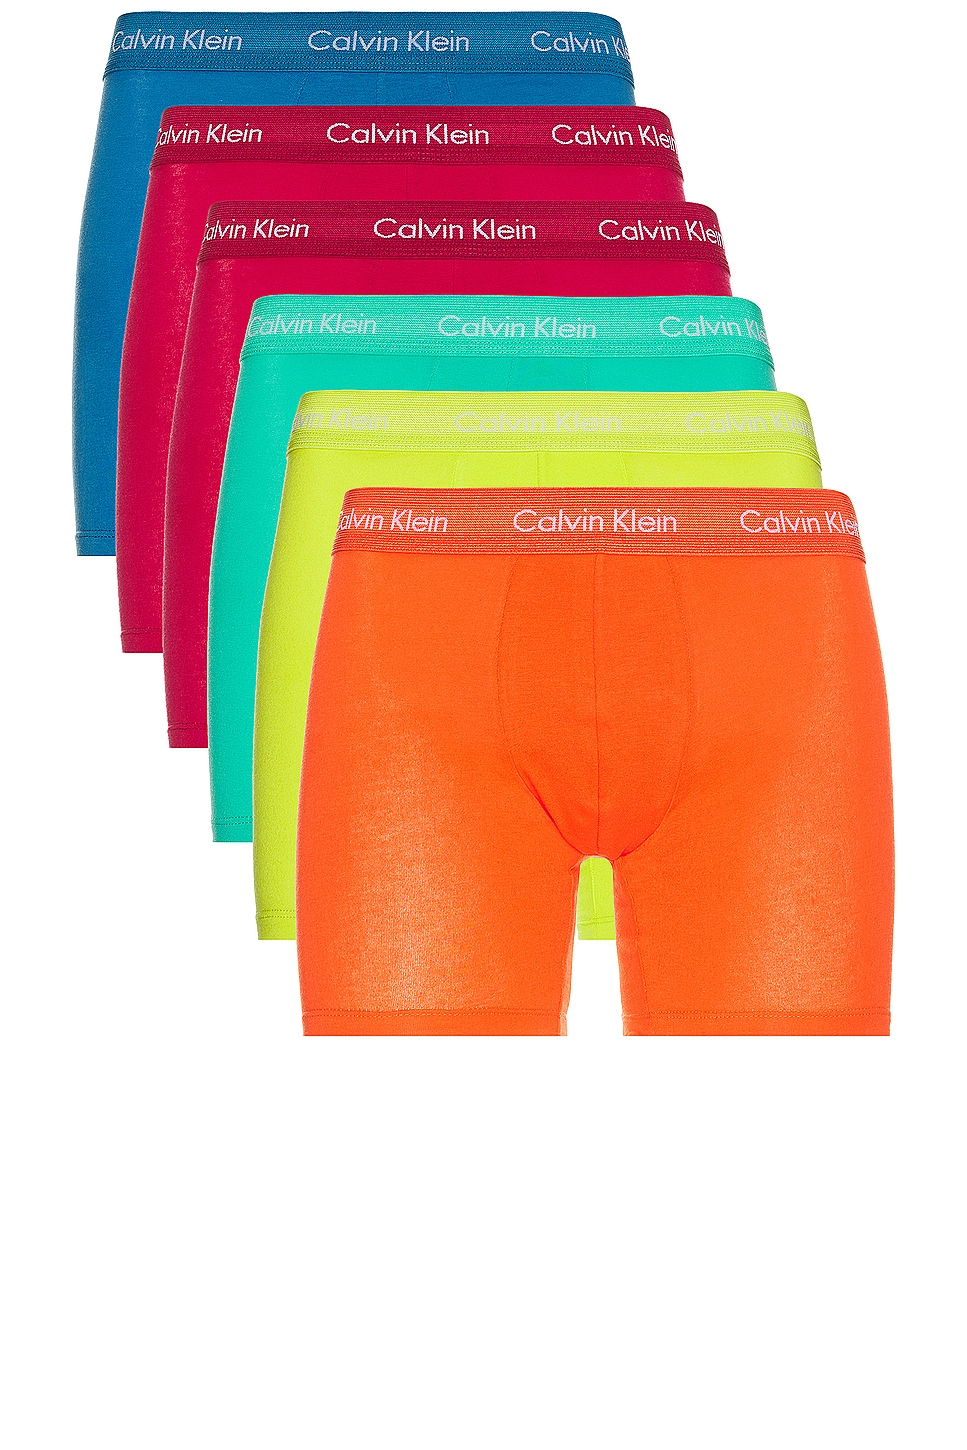 Image 1 of Calvin Klein Underwear Boxer Brief 5-pack in Cherry Tomato, Persian Red, Lemon Lime, Aqua Green, & Blue Ambience